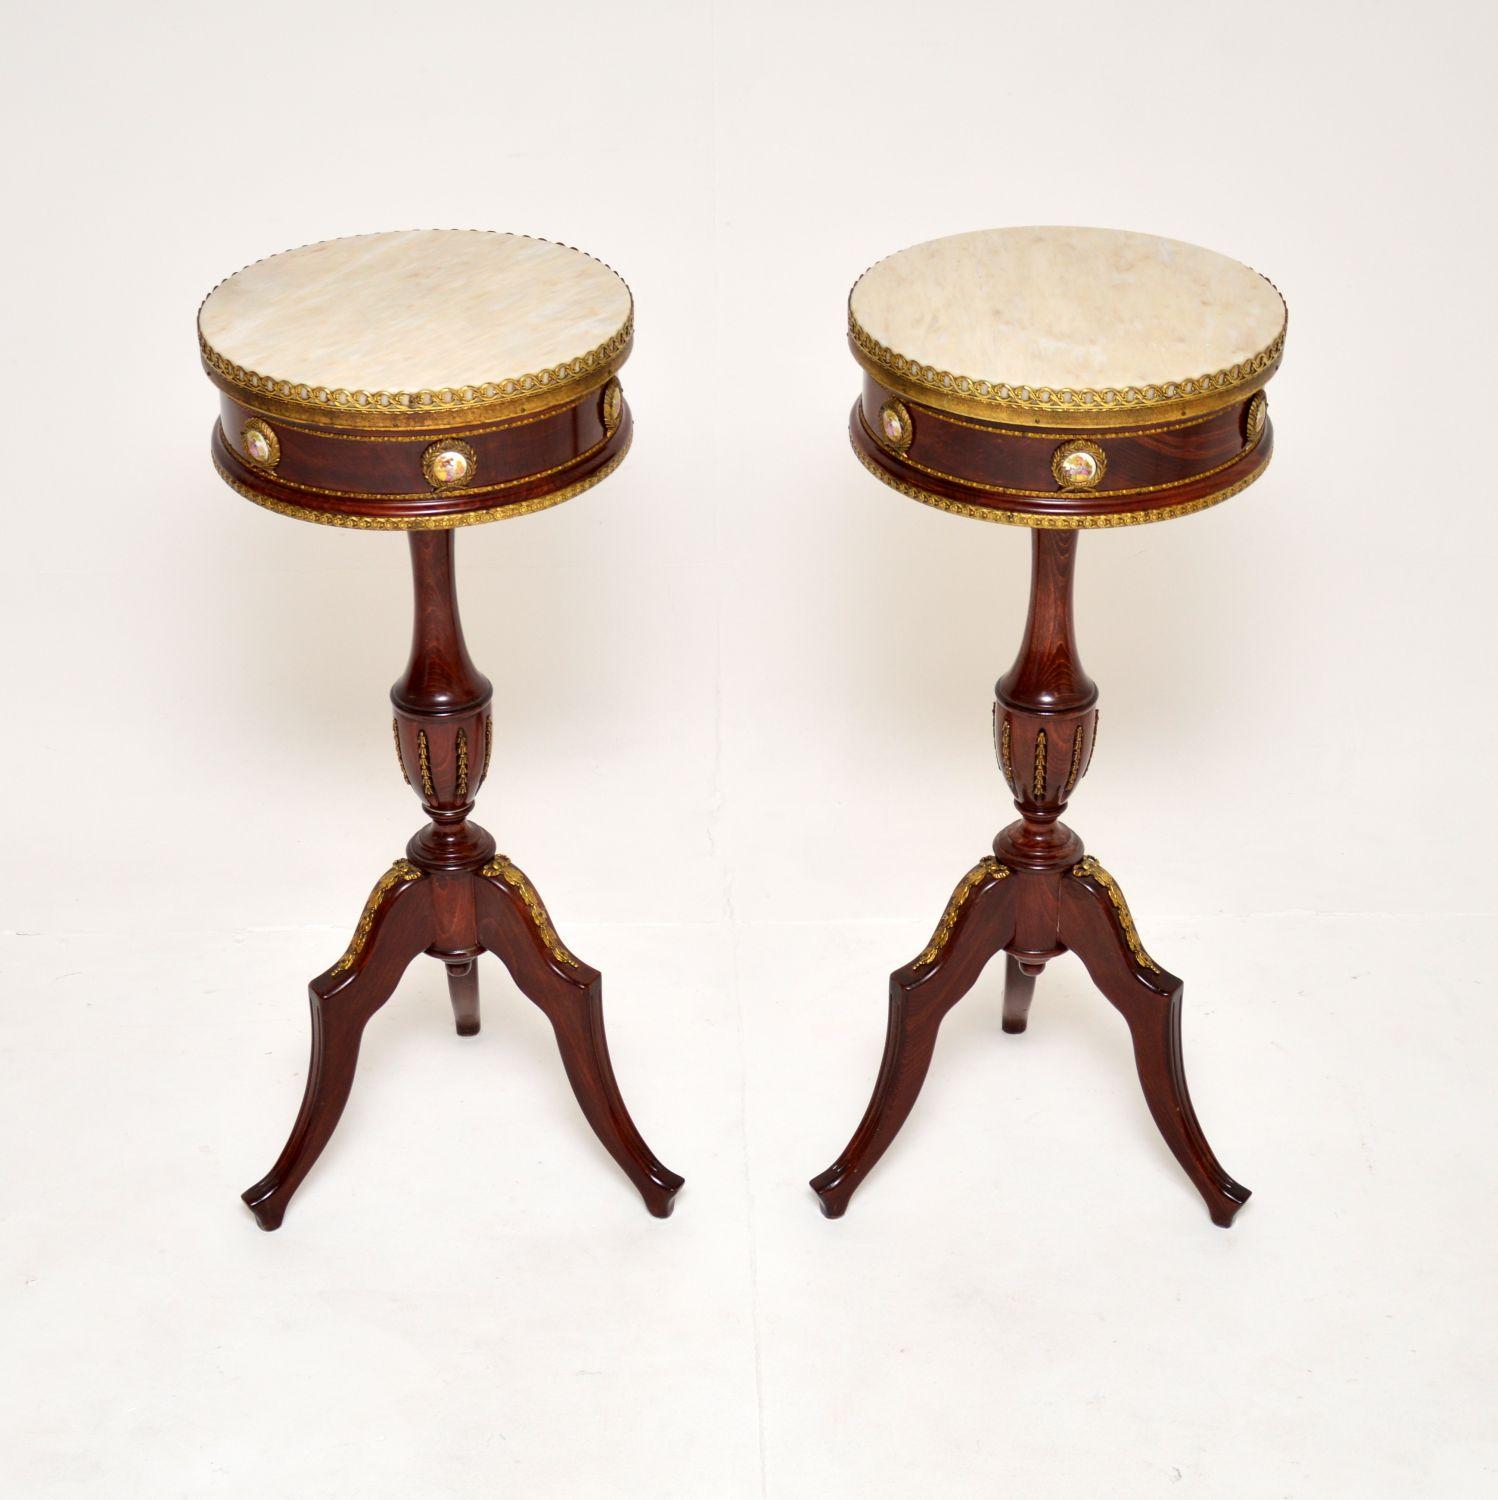 A stunning pair of antique French marble top side tables, dating from around the 1930’s.

They are of superb quality and are a very useful size, quite, slim and elegant. The frames have high quality gilt metal mounts, with beautiful Limoges